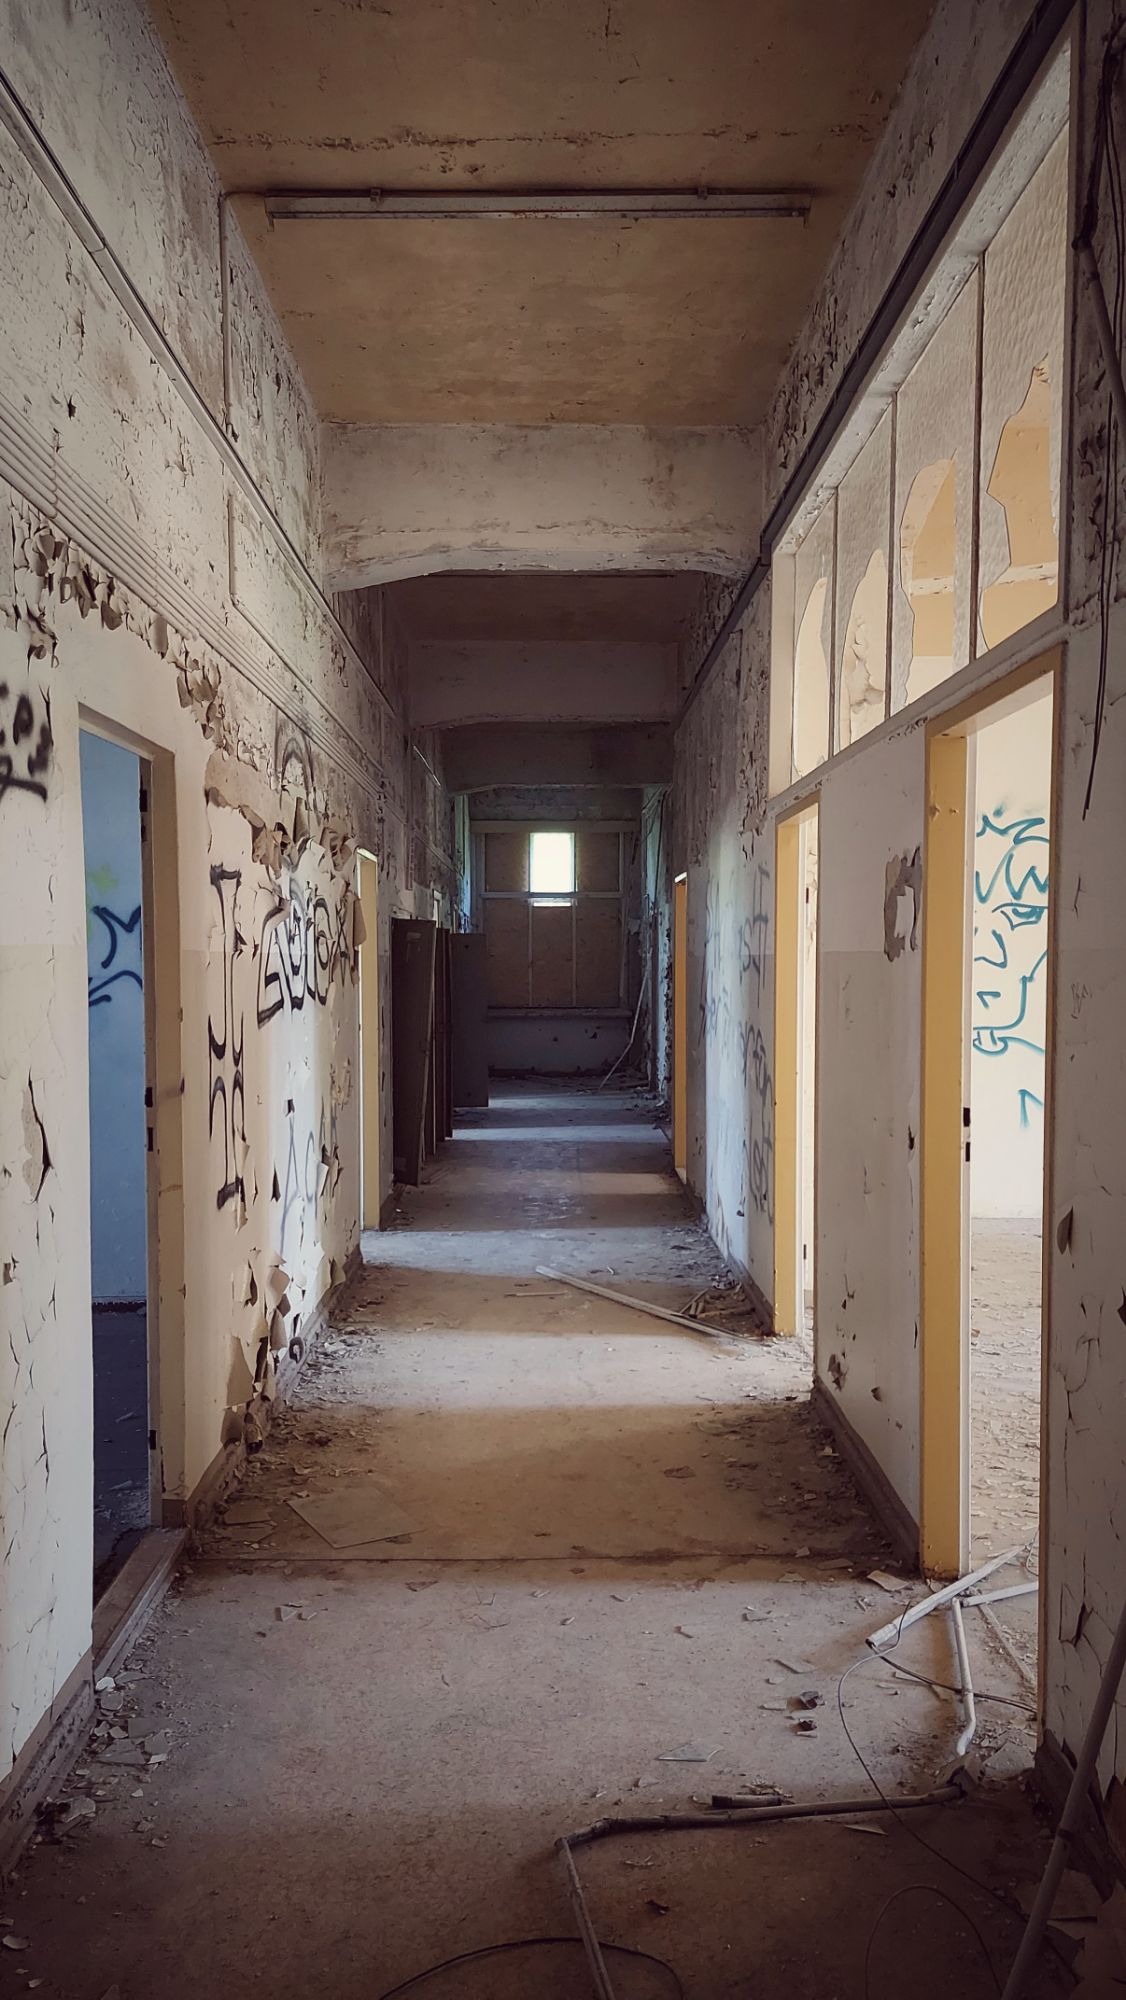 A hallway without doors, dirty and left abandoned  